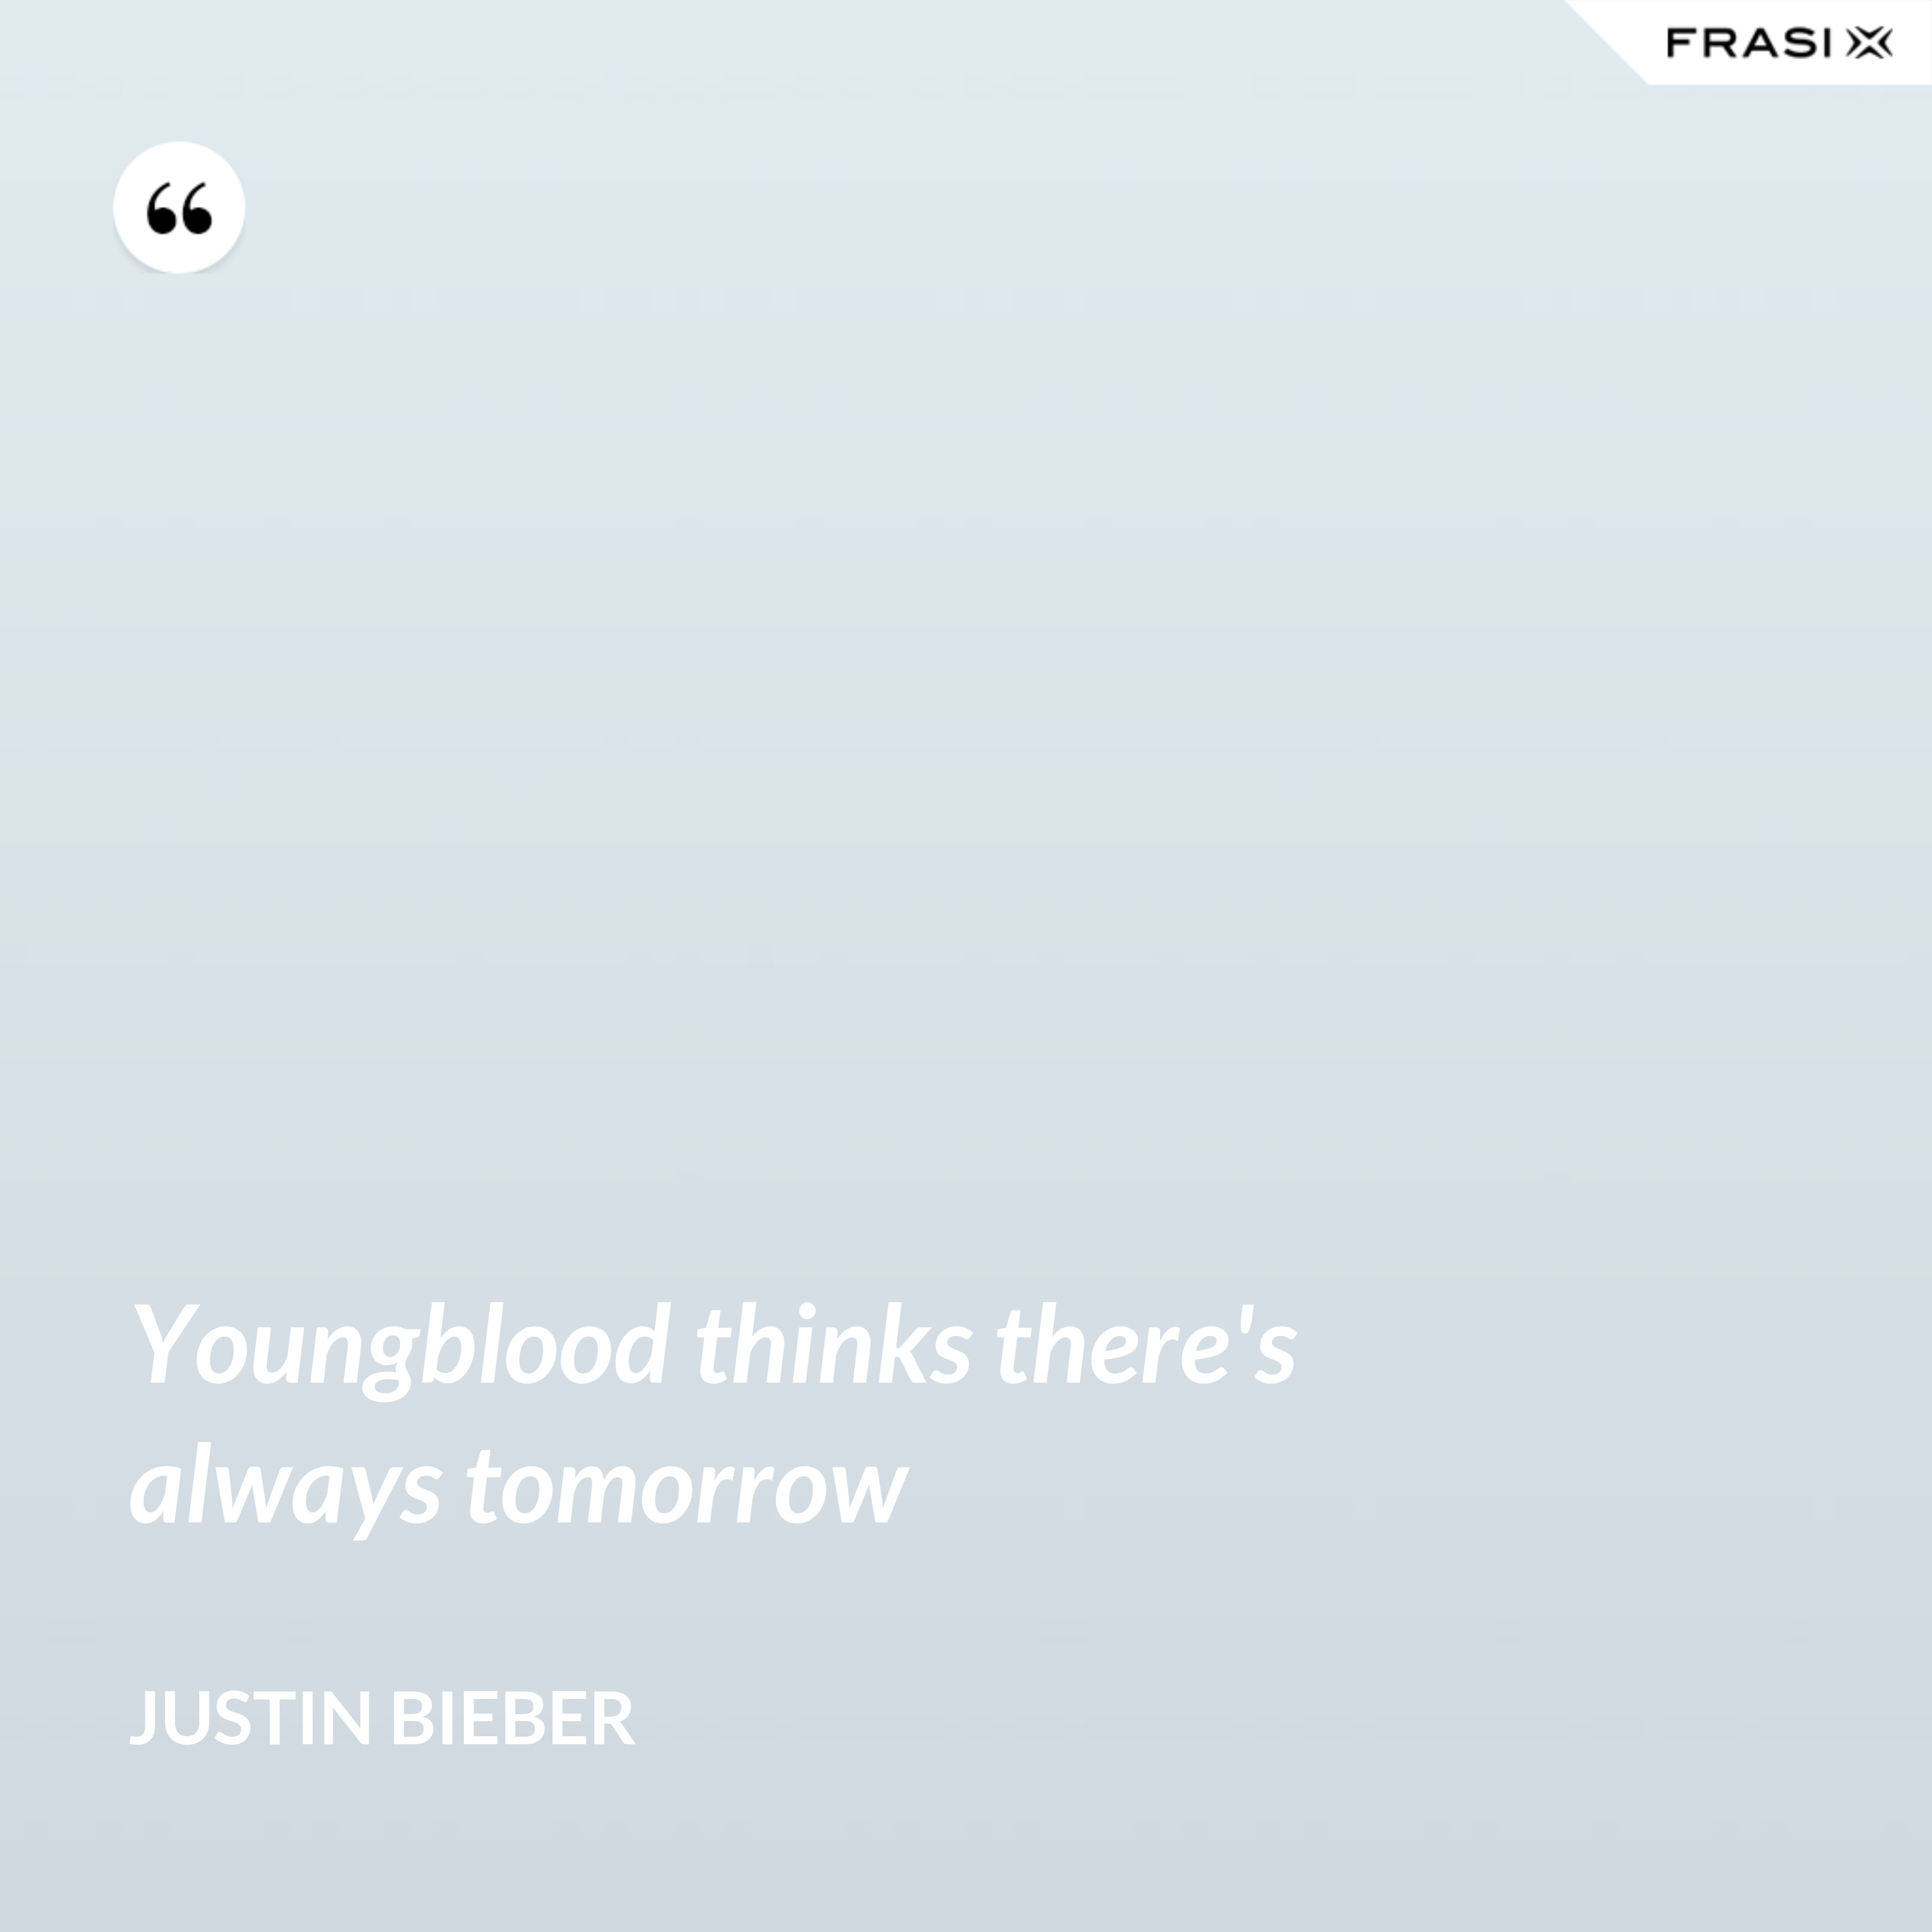 Youngblood thinks there's always tomorrow - Justin Bieber